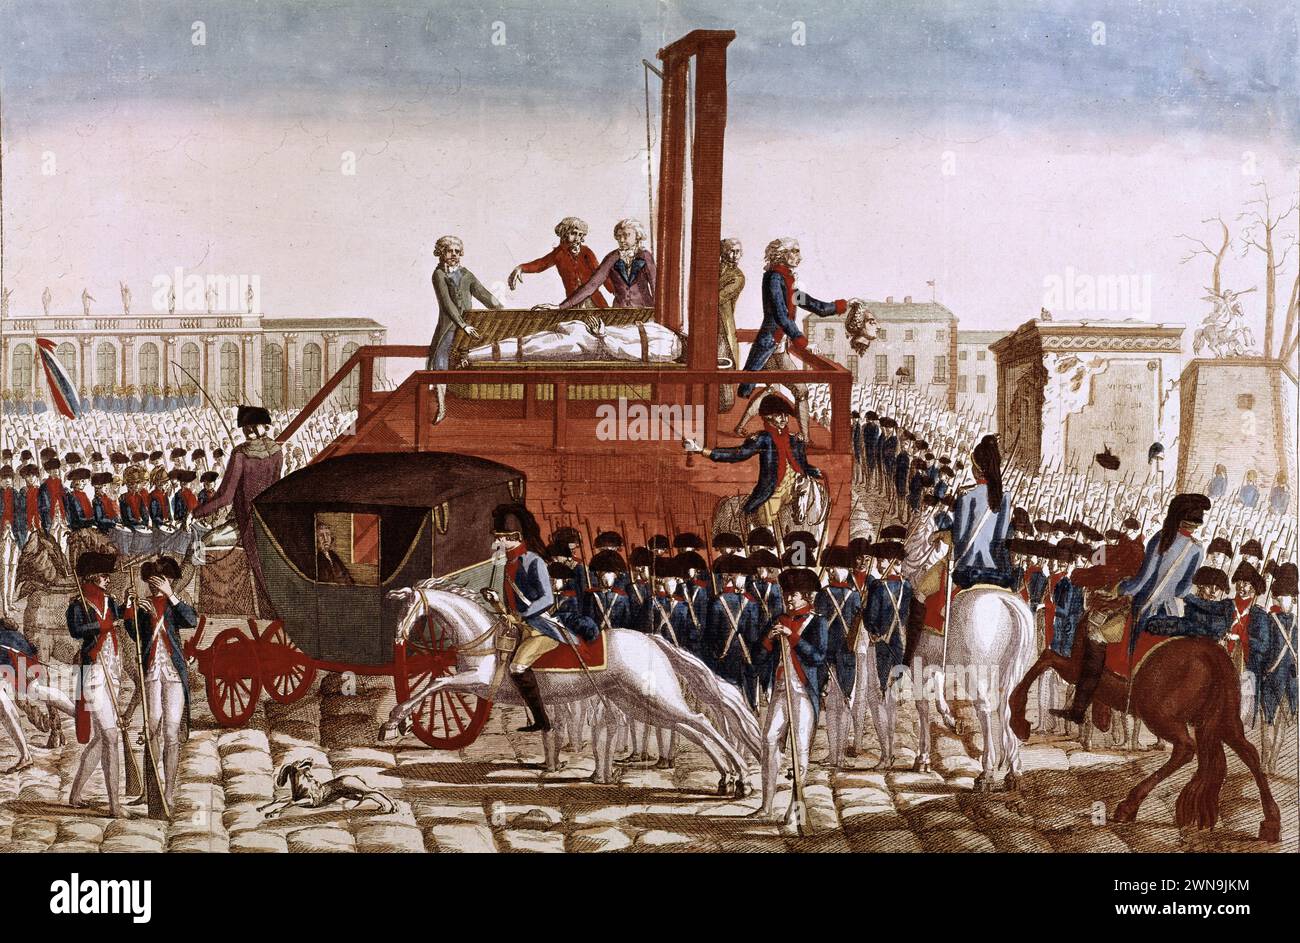 The death of Louis XVI on 21 January 1793. His head was shown to the crowd by Charles Henri Sauson, the Butcher of Paris on 21/01/1793. Stock Photo